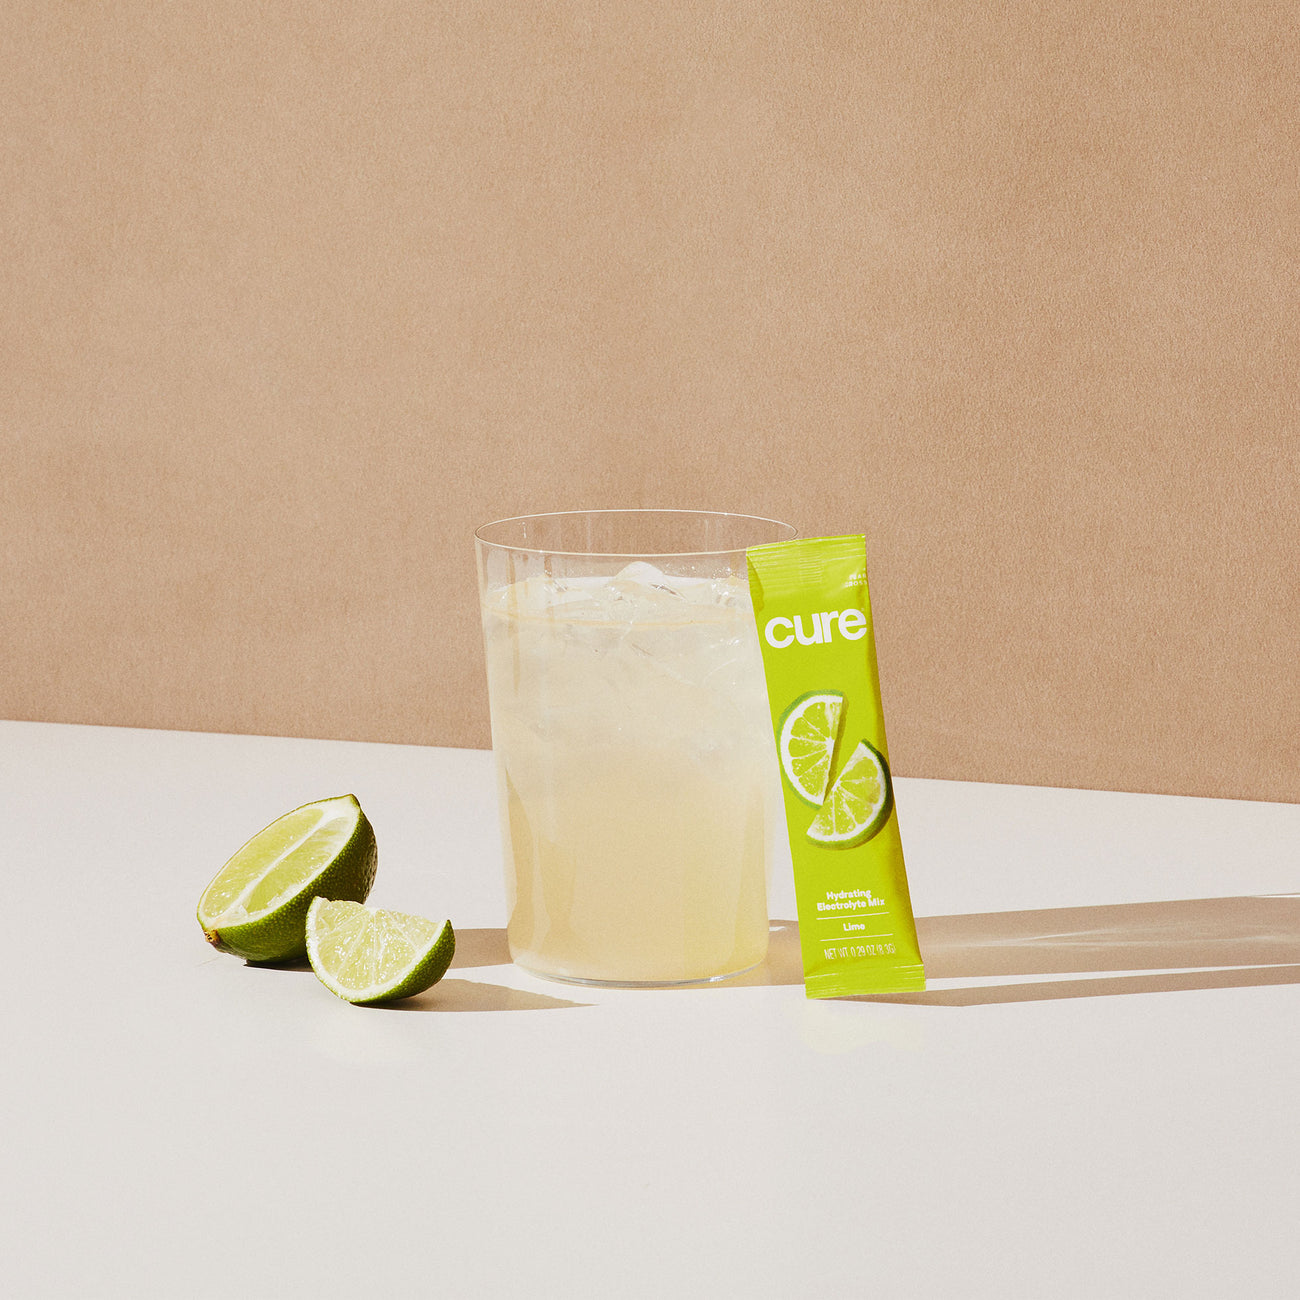 Lime - Hydrating Electrolyte Drink Mix with no Added Sugar or Artificial Ingredients by Cure